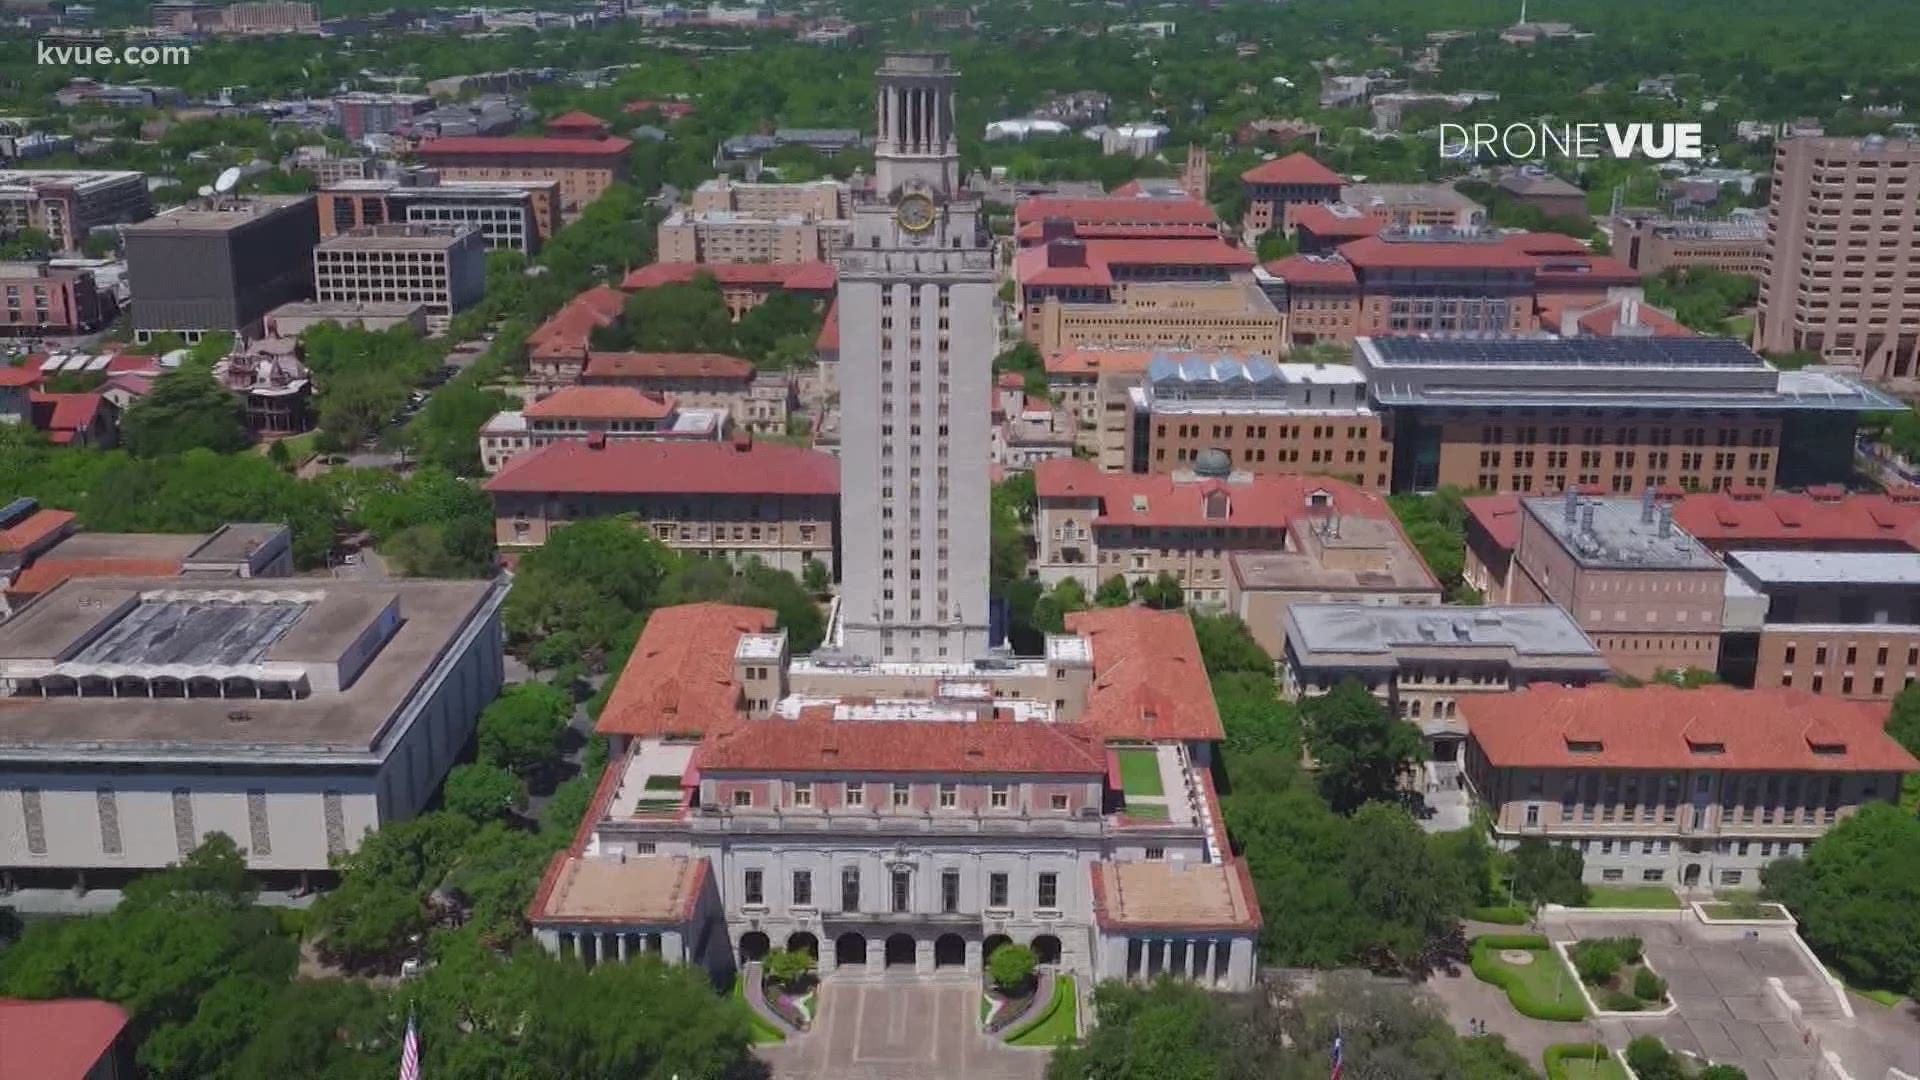 The student claims the online learning options offered by the University of Texas are inferior to the "in-person, hands-on" education she and others paid for.